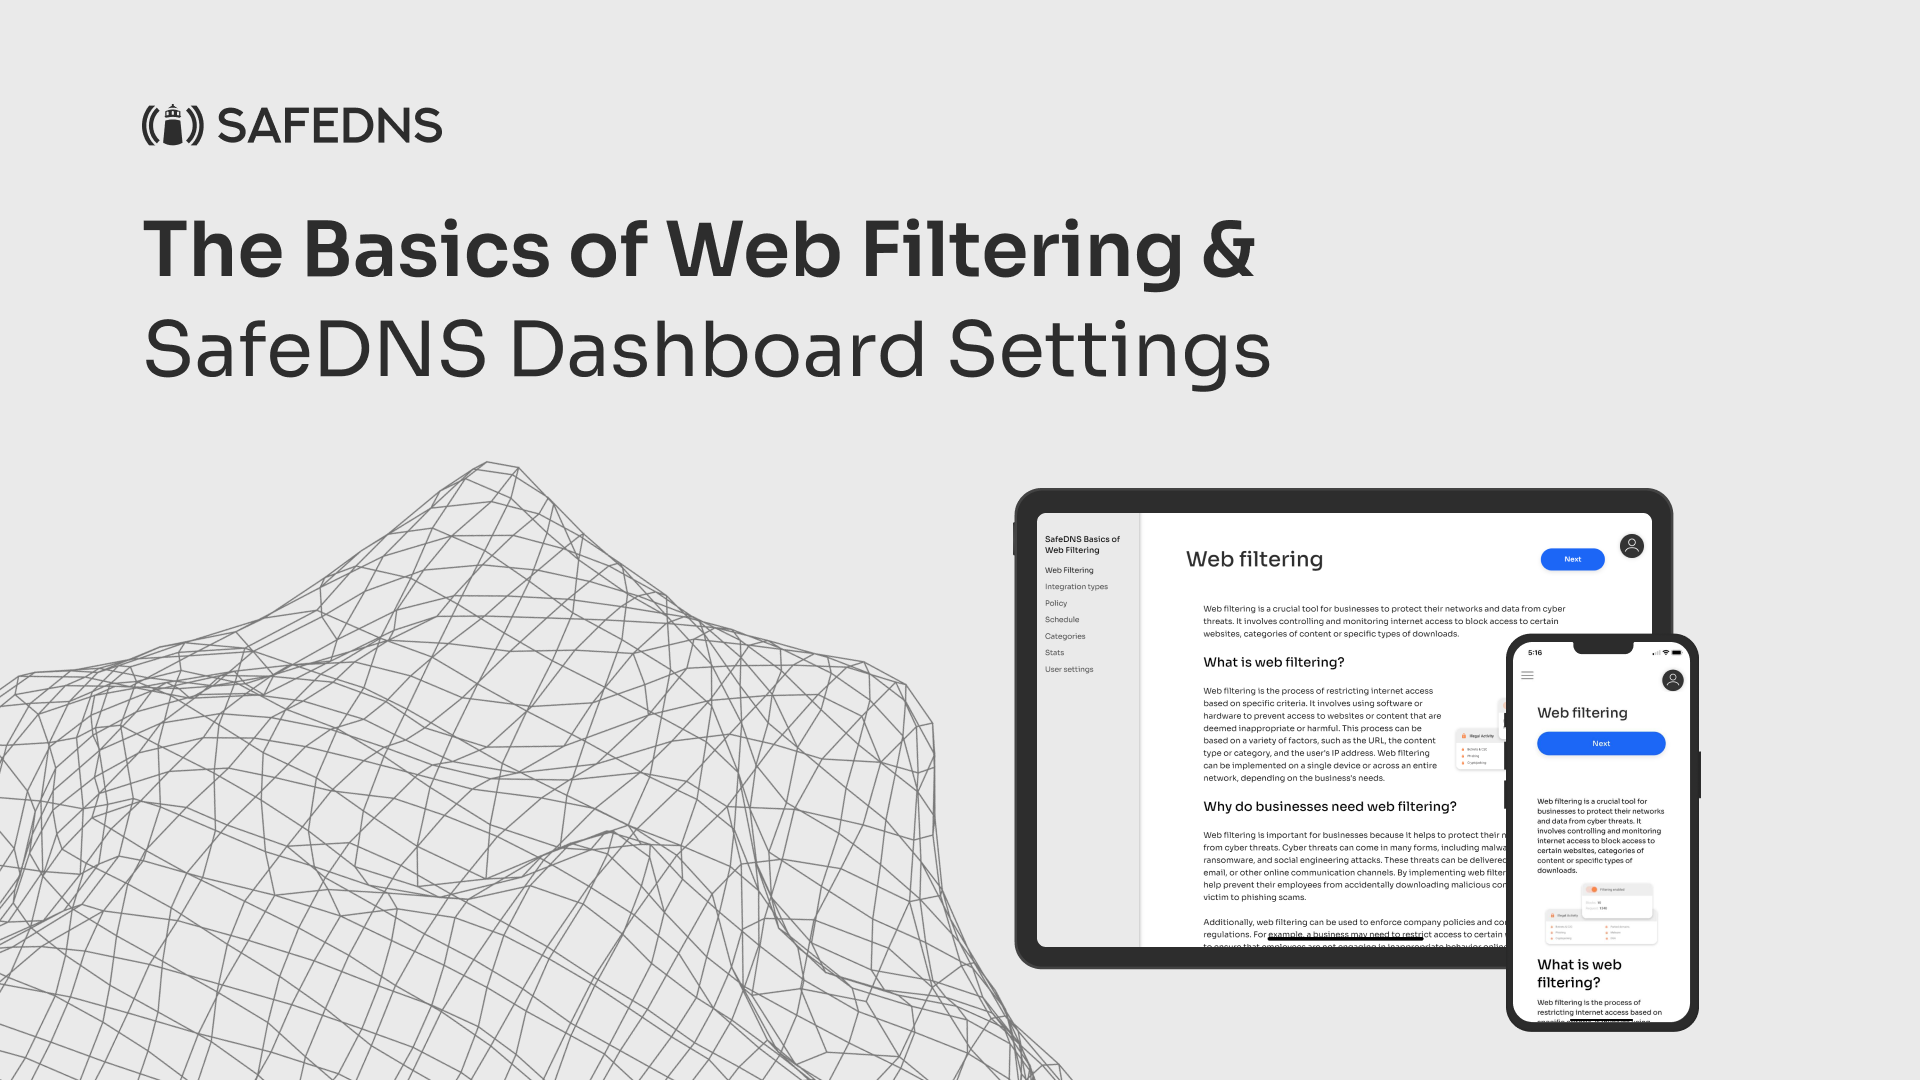 SafeDNS Course: The Basics of Web Filtering and SafeDNS Dashboard Settings